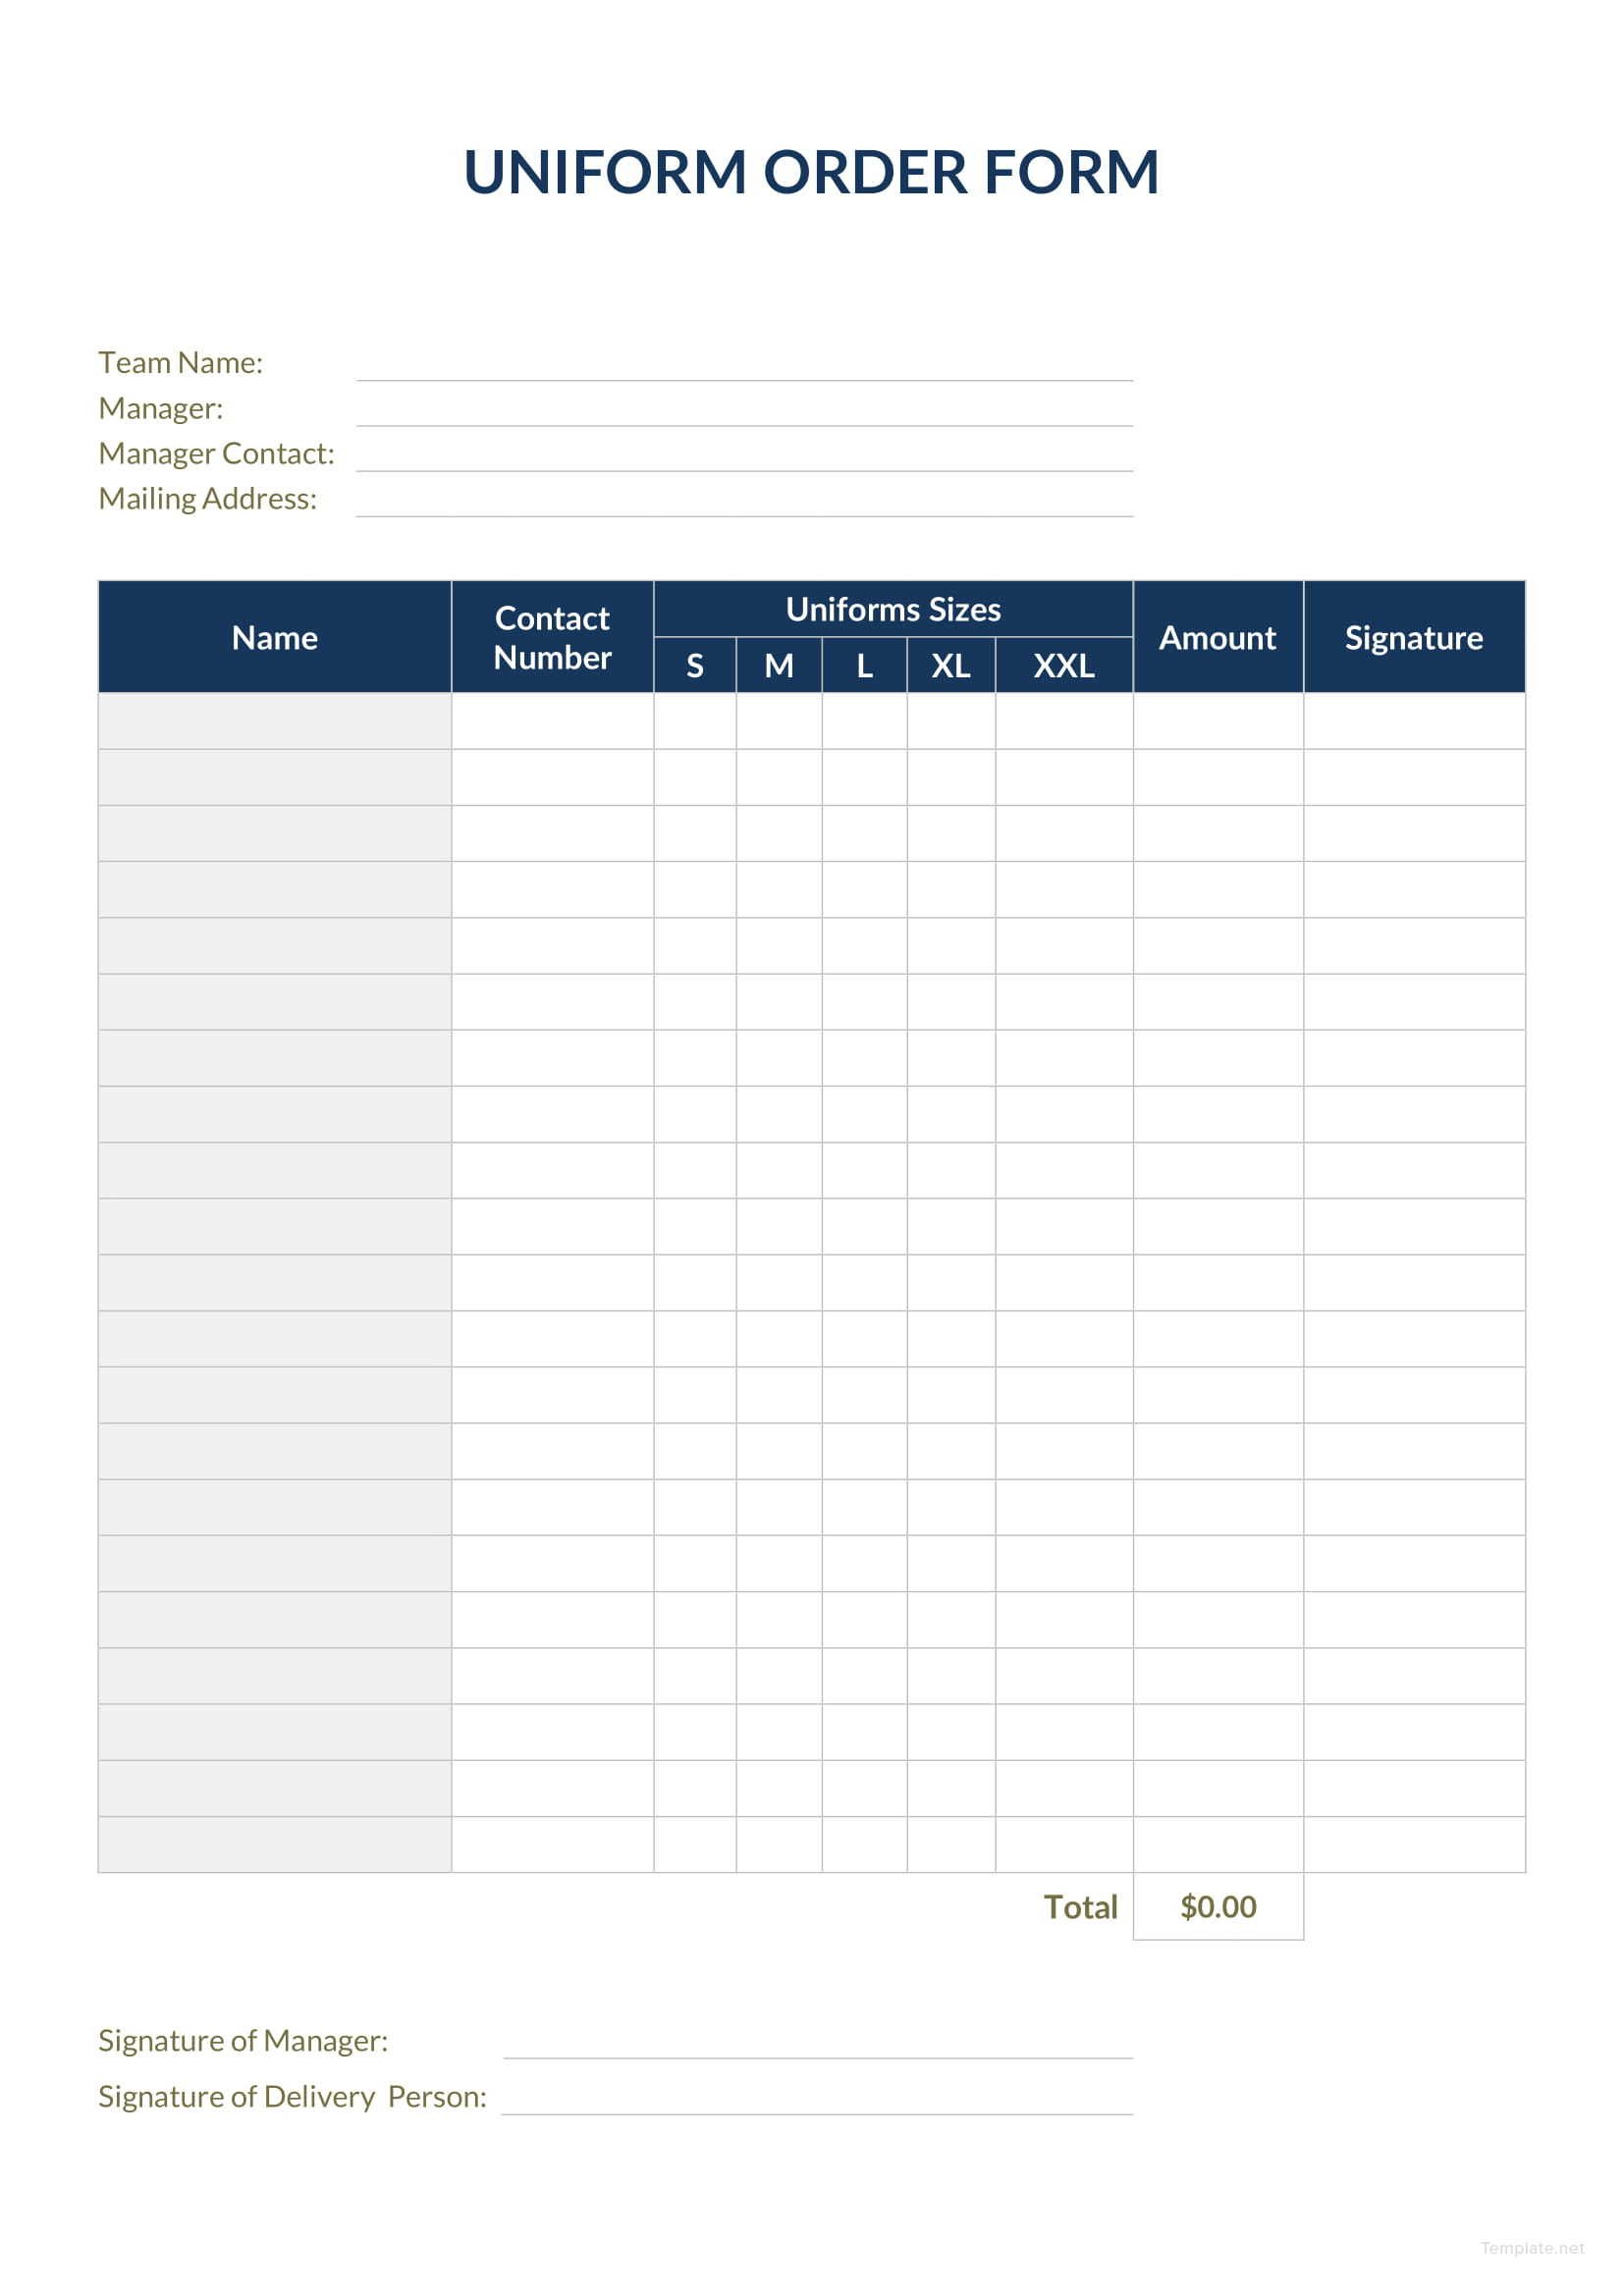 Uniform Order Form Template in Microsoft Word, Excel